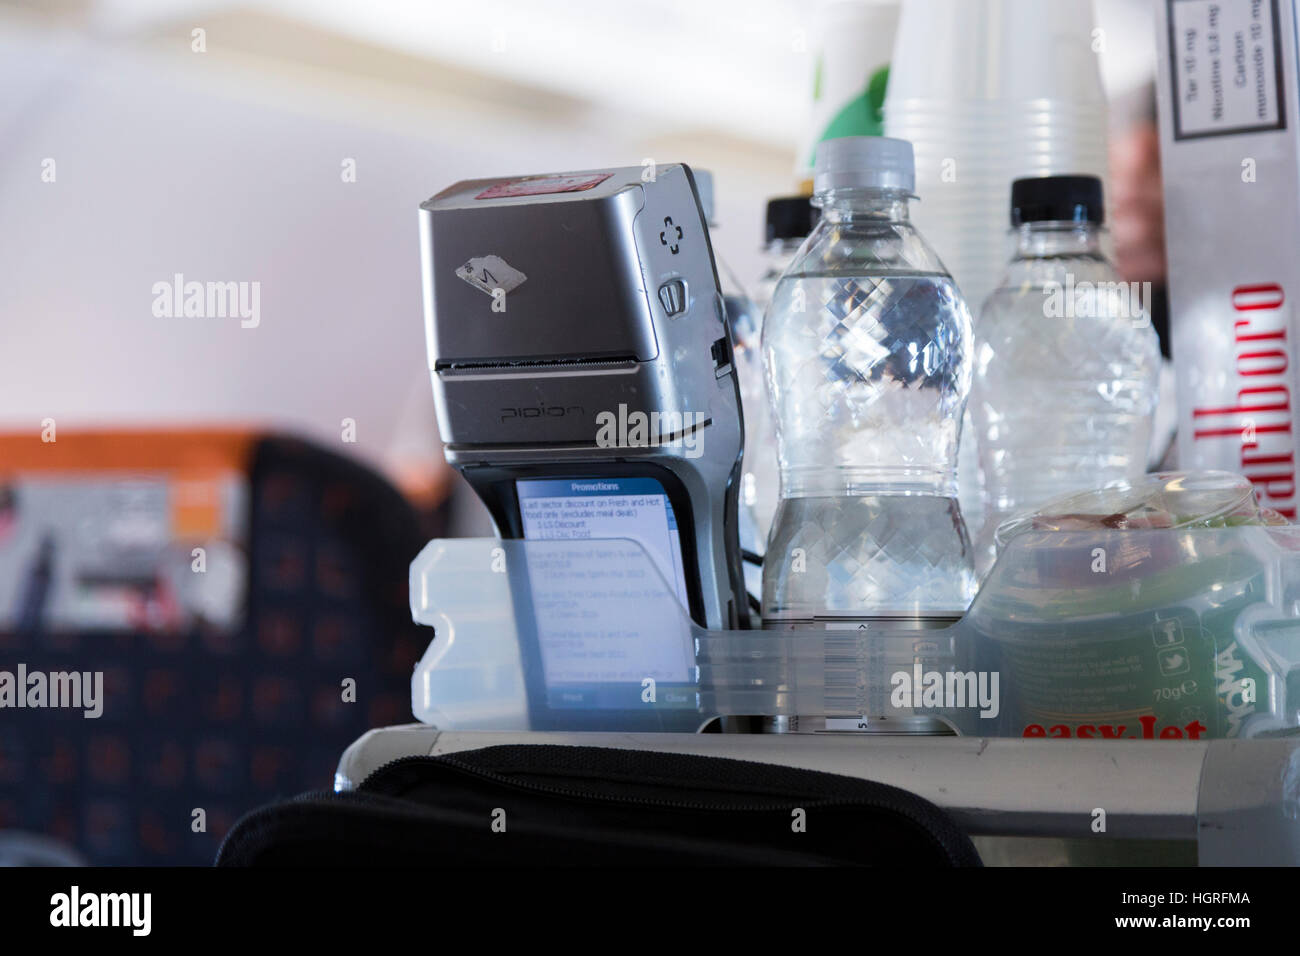 Money payment terminal device & trolley cart. Cabin crew air take passenger credit card payment for drinks snacks Easyjet flight Stock Photo